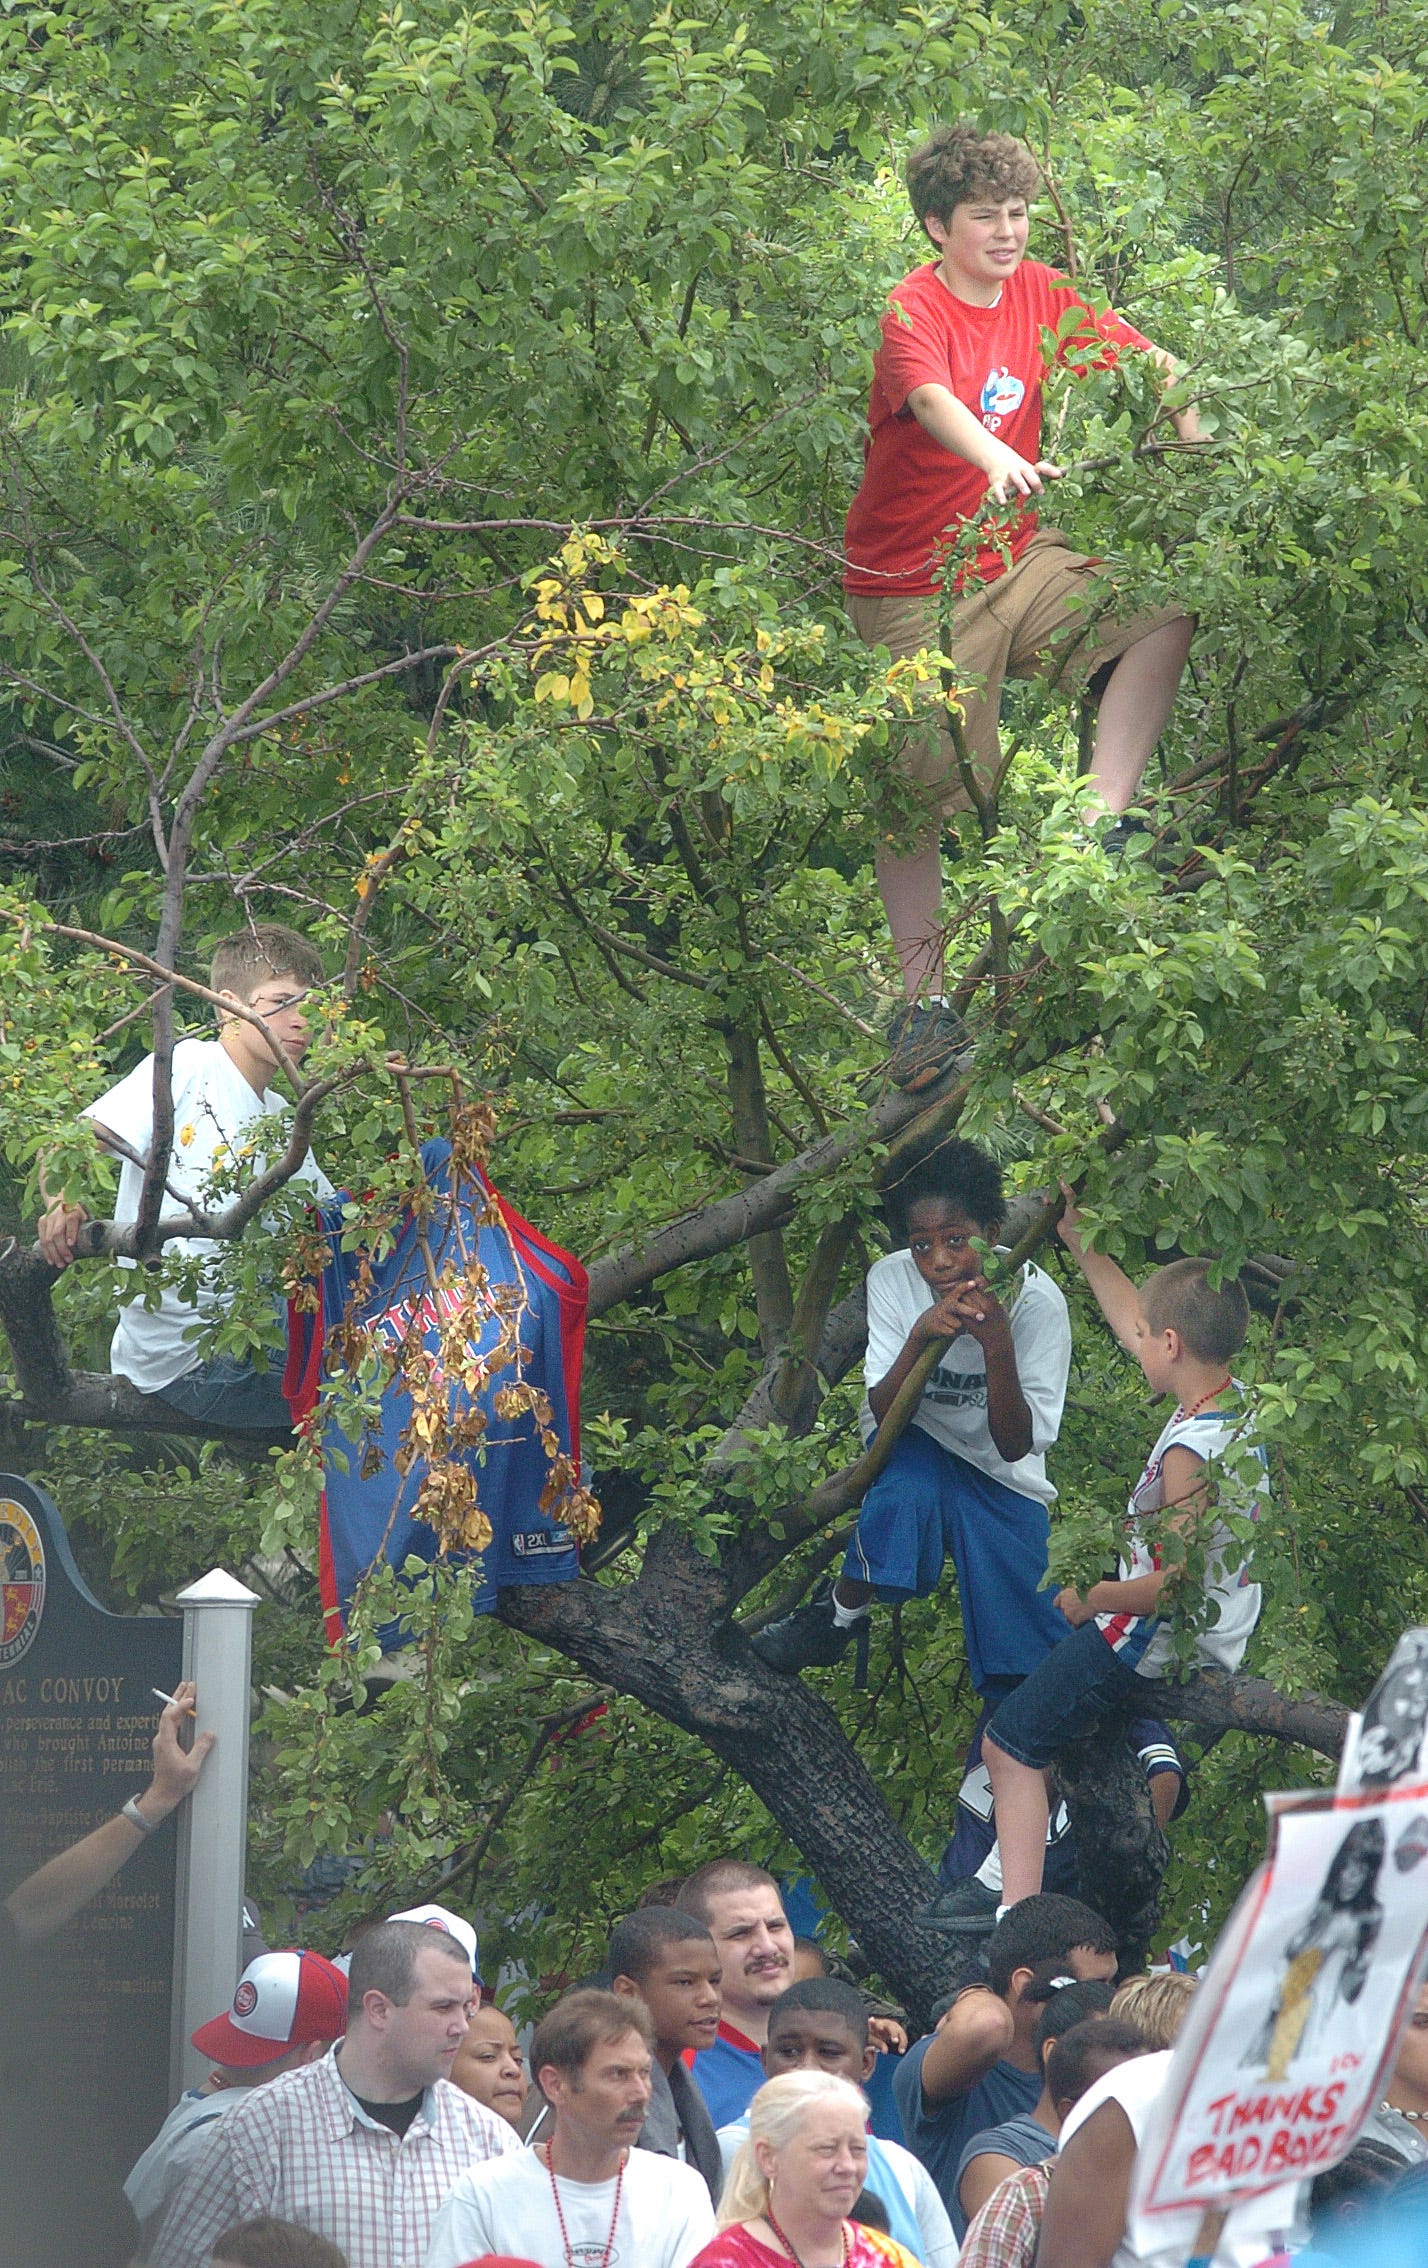 Kids climb up into the trees in Hart Plaza for a better view.